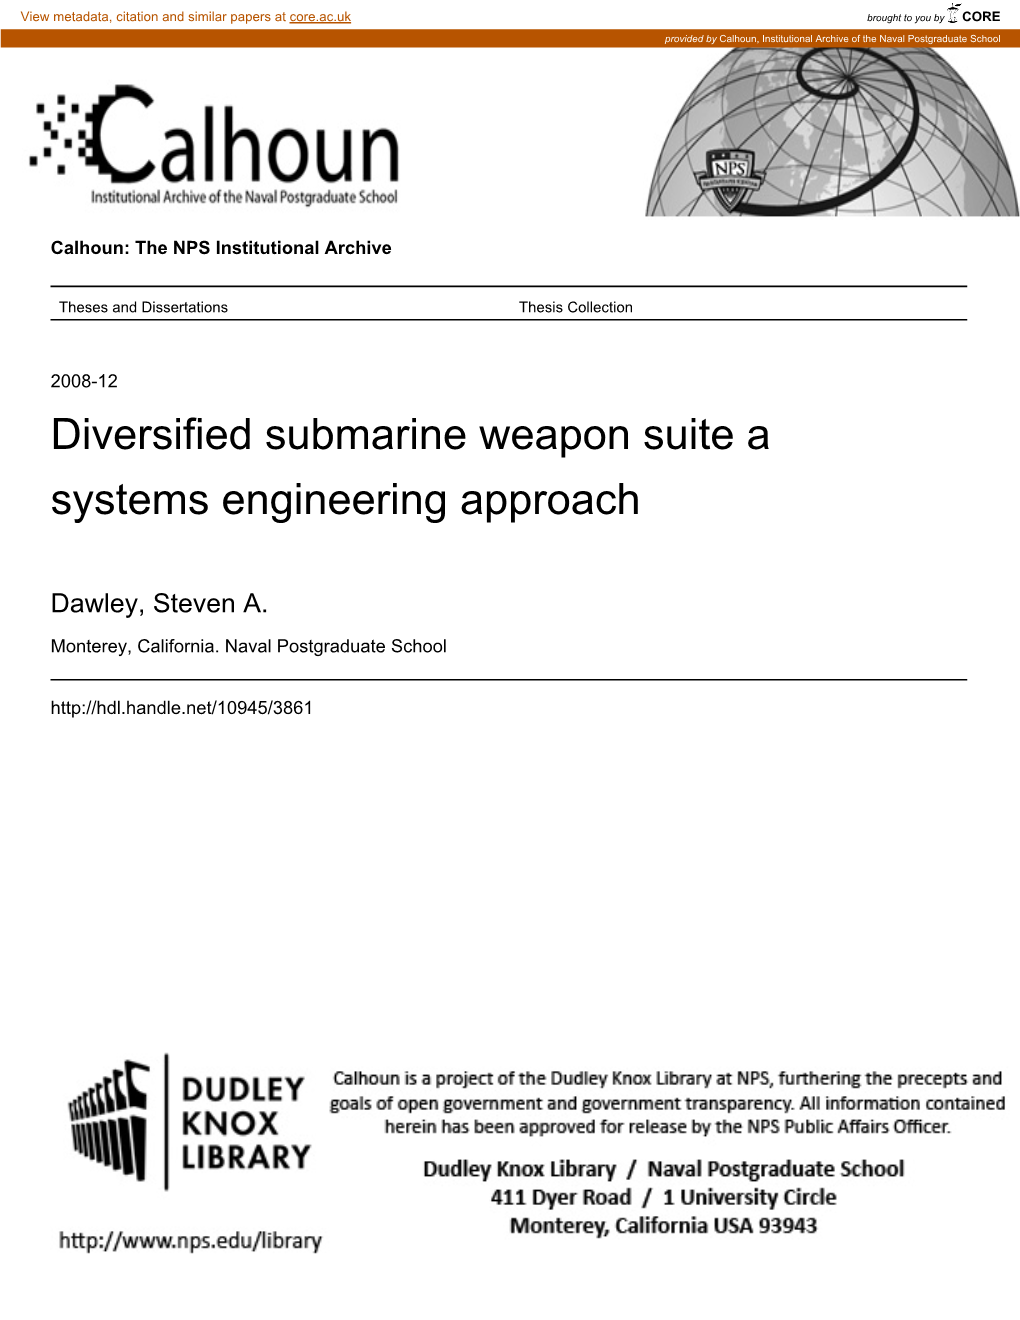 Diversified Submarine Weapon Suite a Systems Engineering Approach